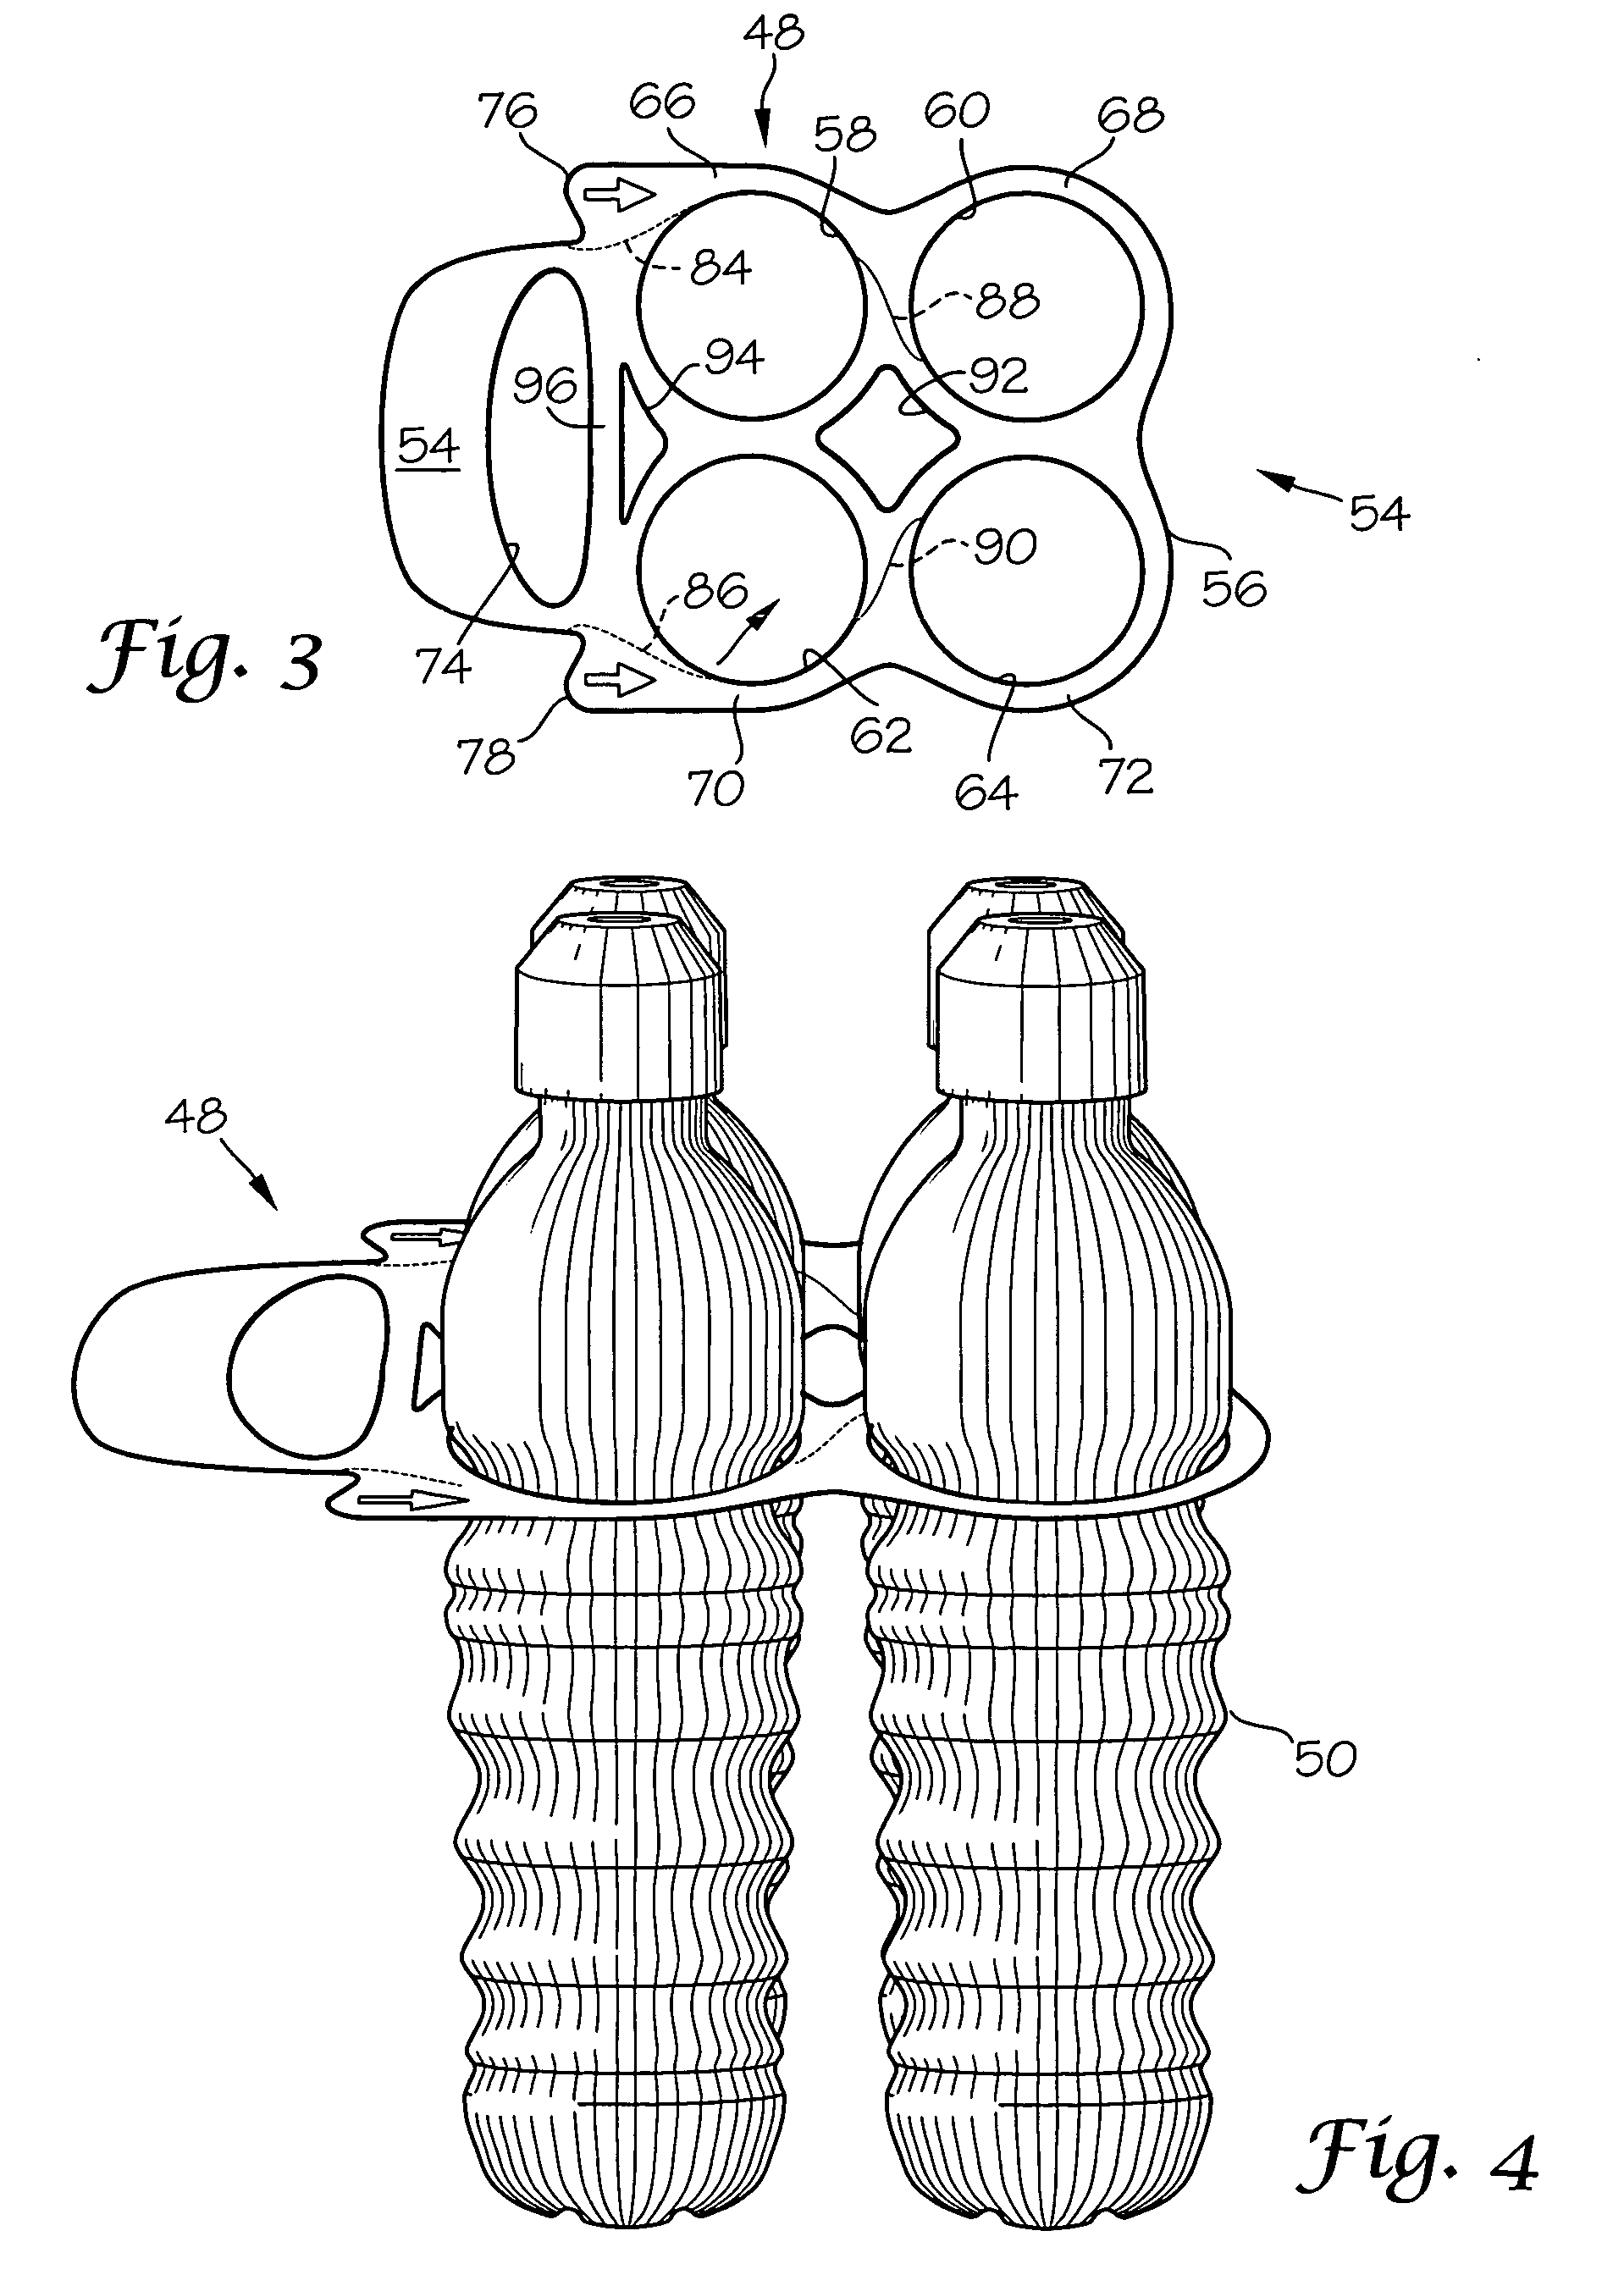 Bottle carrier with handle and pull tab